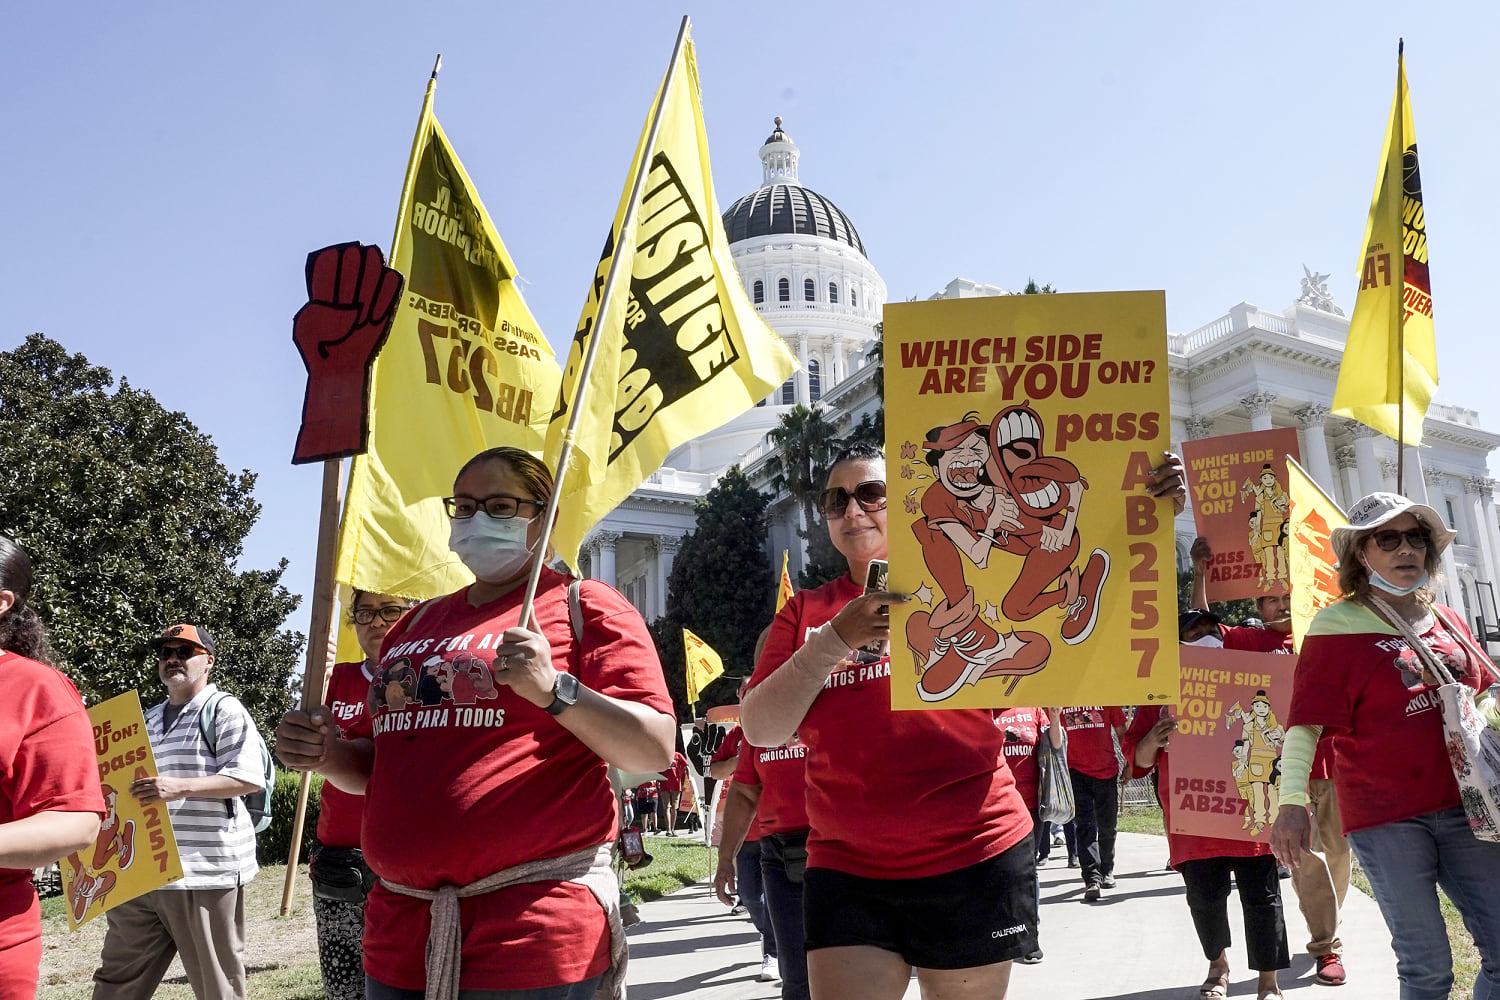 New $20 minimum wage for fast food workers in California set to start Monday